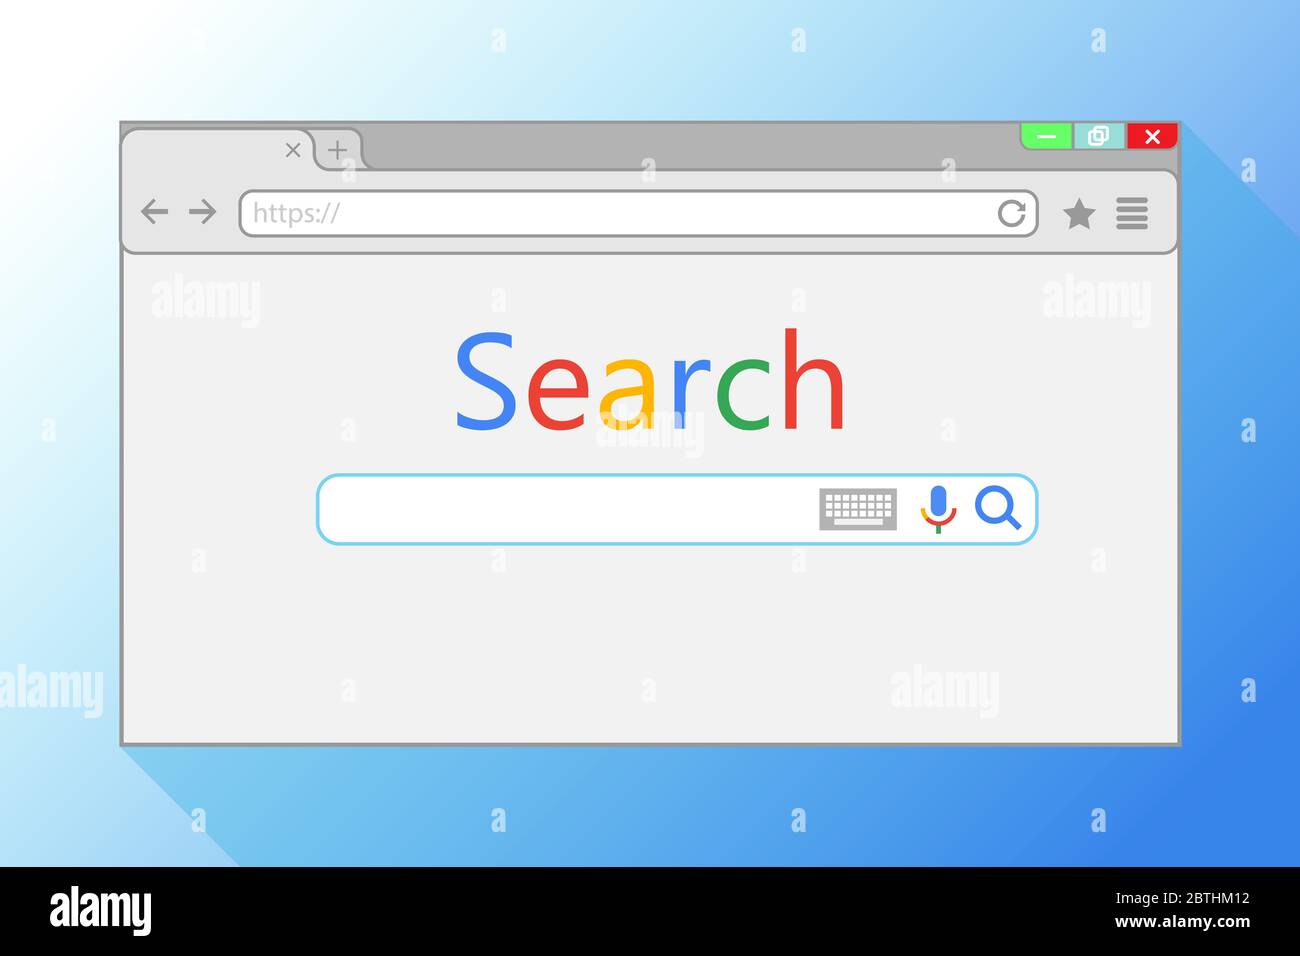 Web browser window on blue background. Search engine in Internet Explorer illustration. Stock Photo